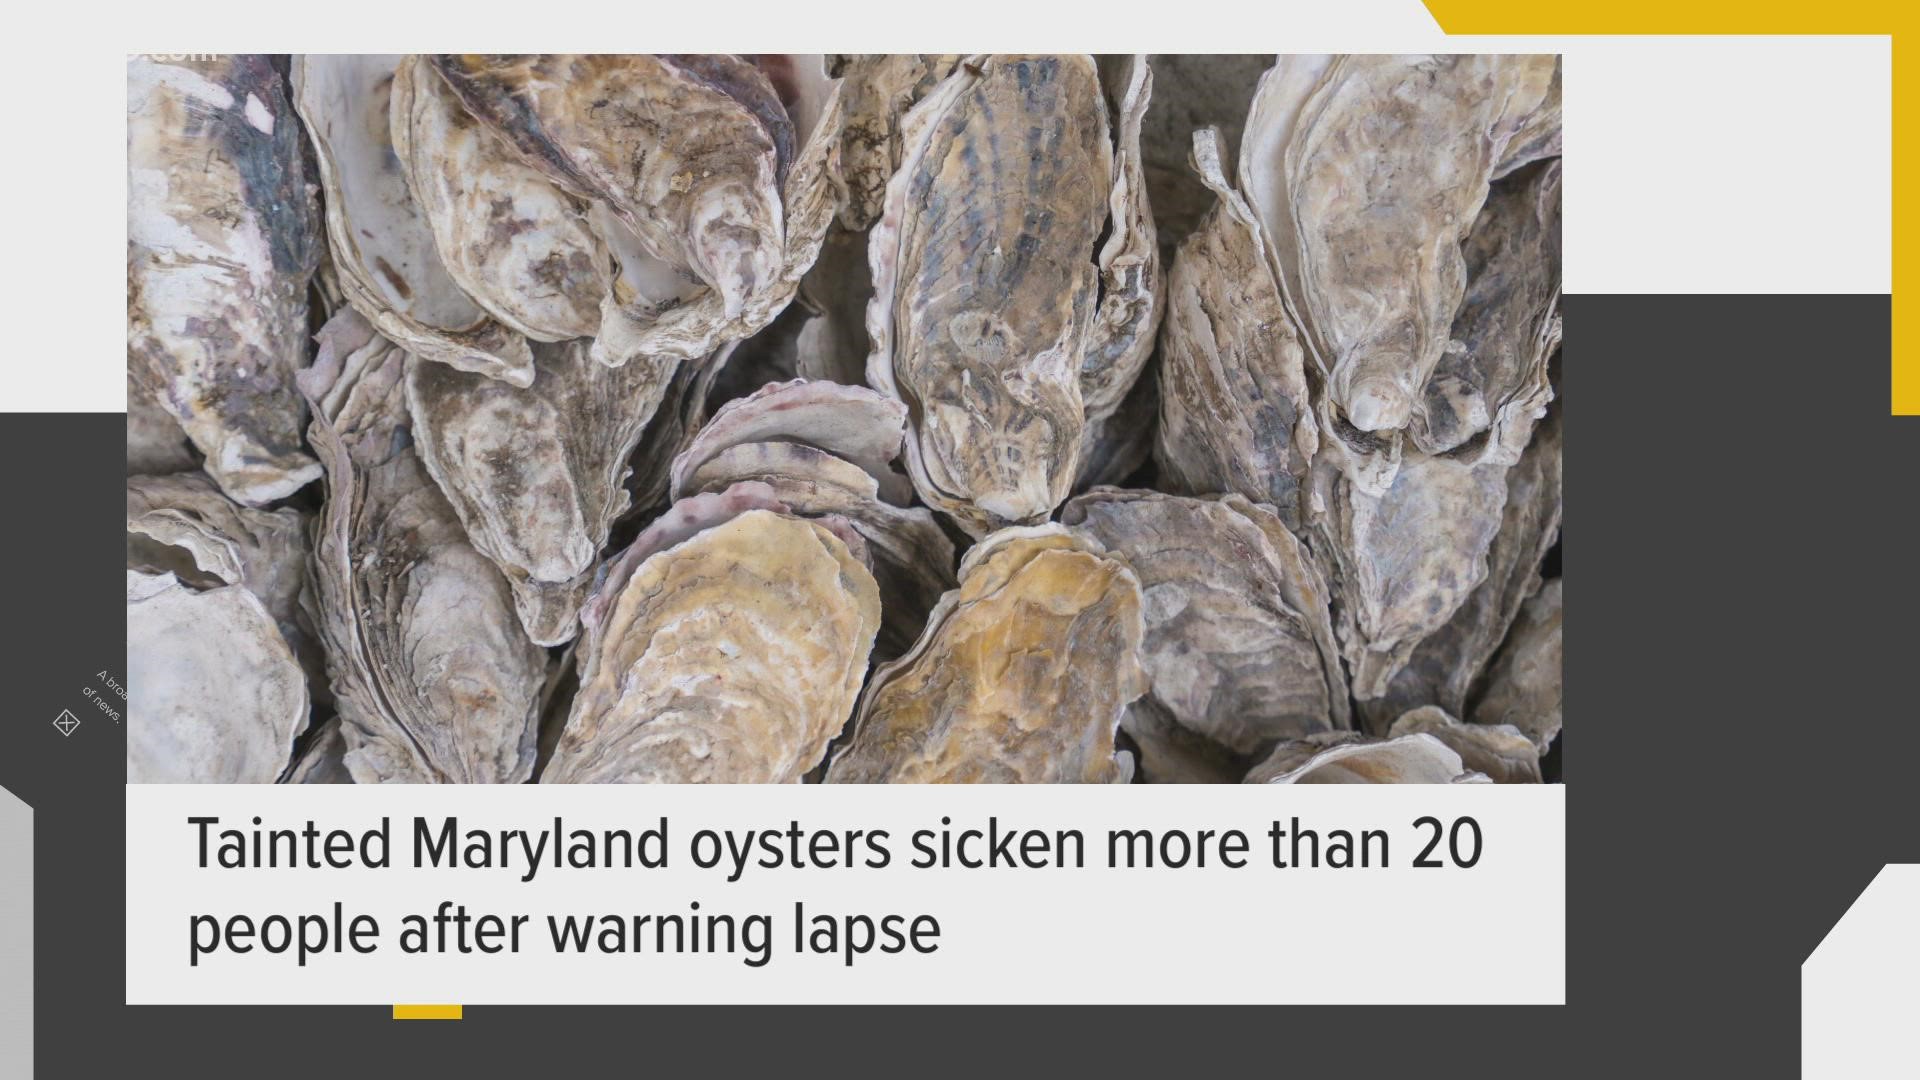 More than 20 people were sickened after eating tainted Maryland oysters and Dollar Tree is raising prices from $1 to $1.25.